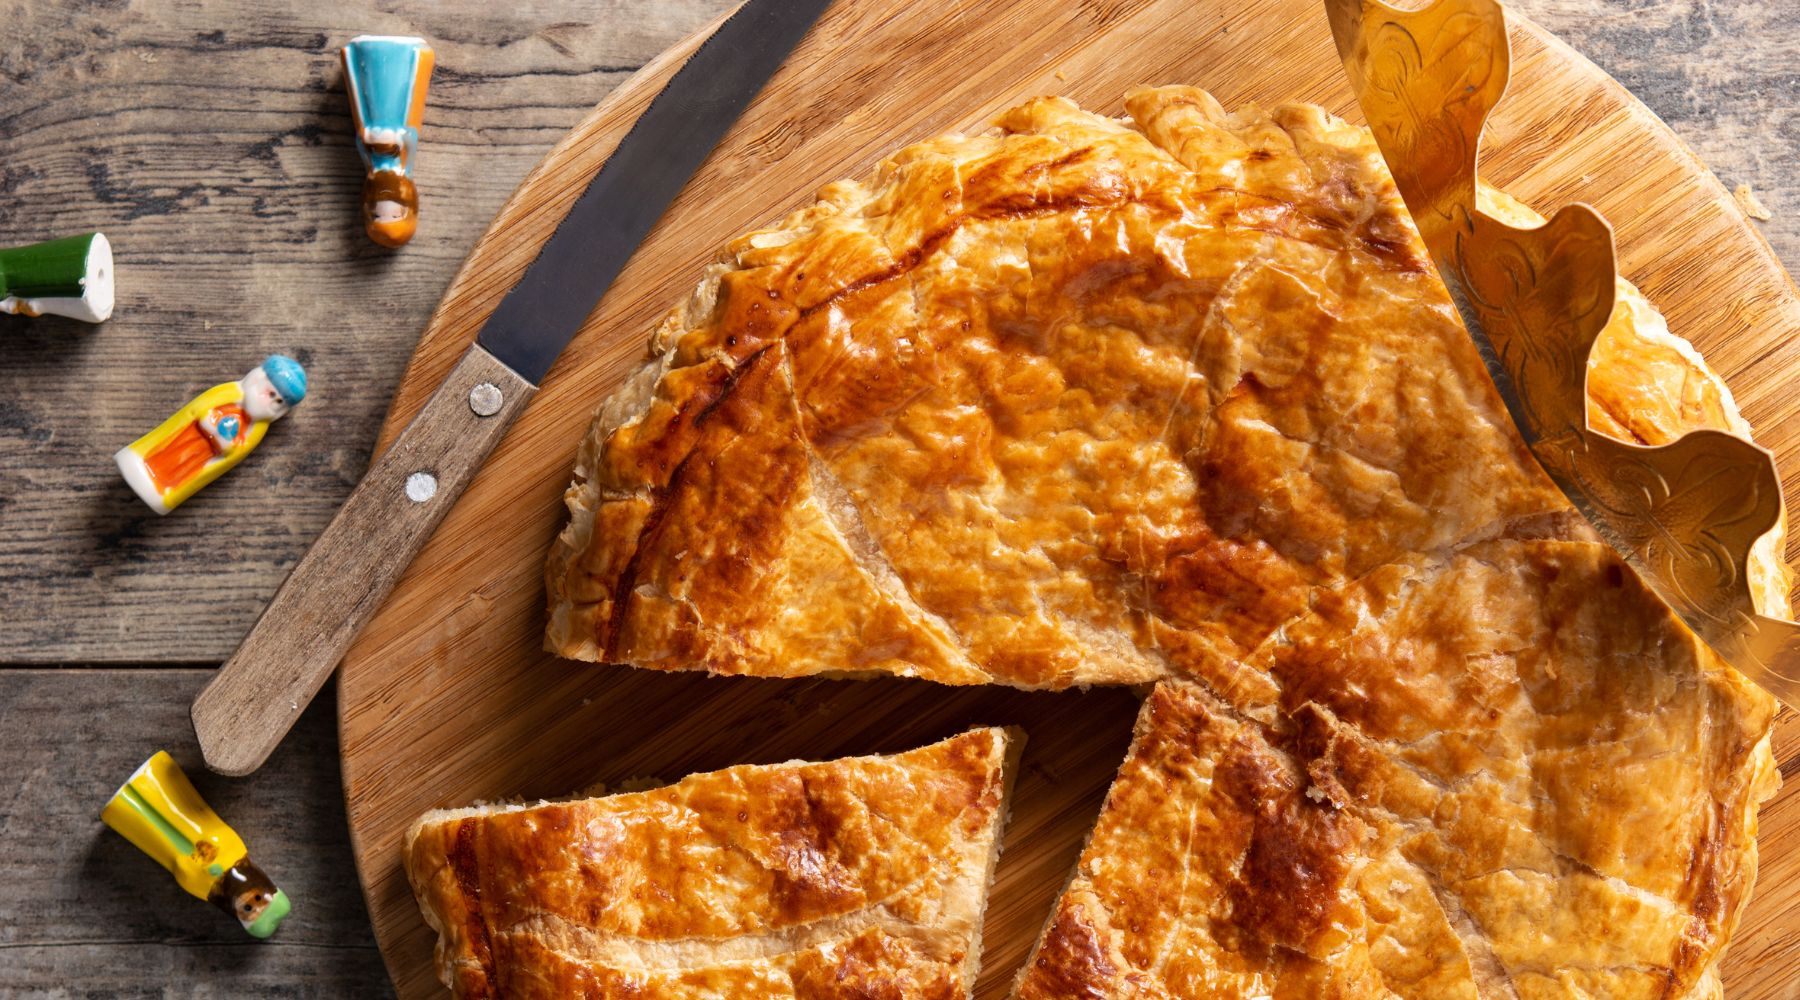 Celebrating French Traditions with "La Galette des Rois"